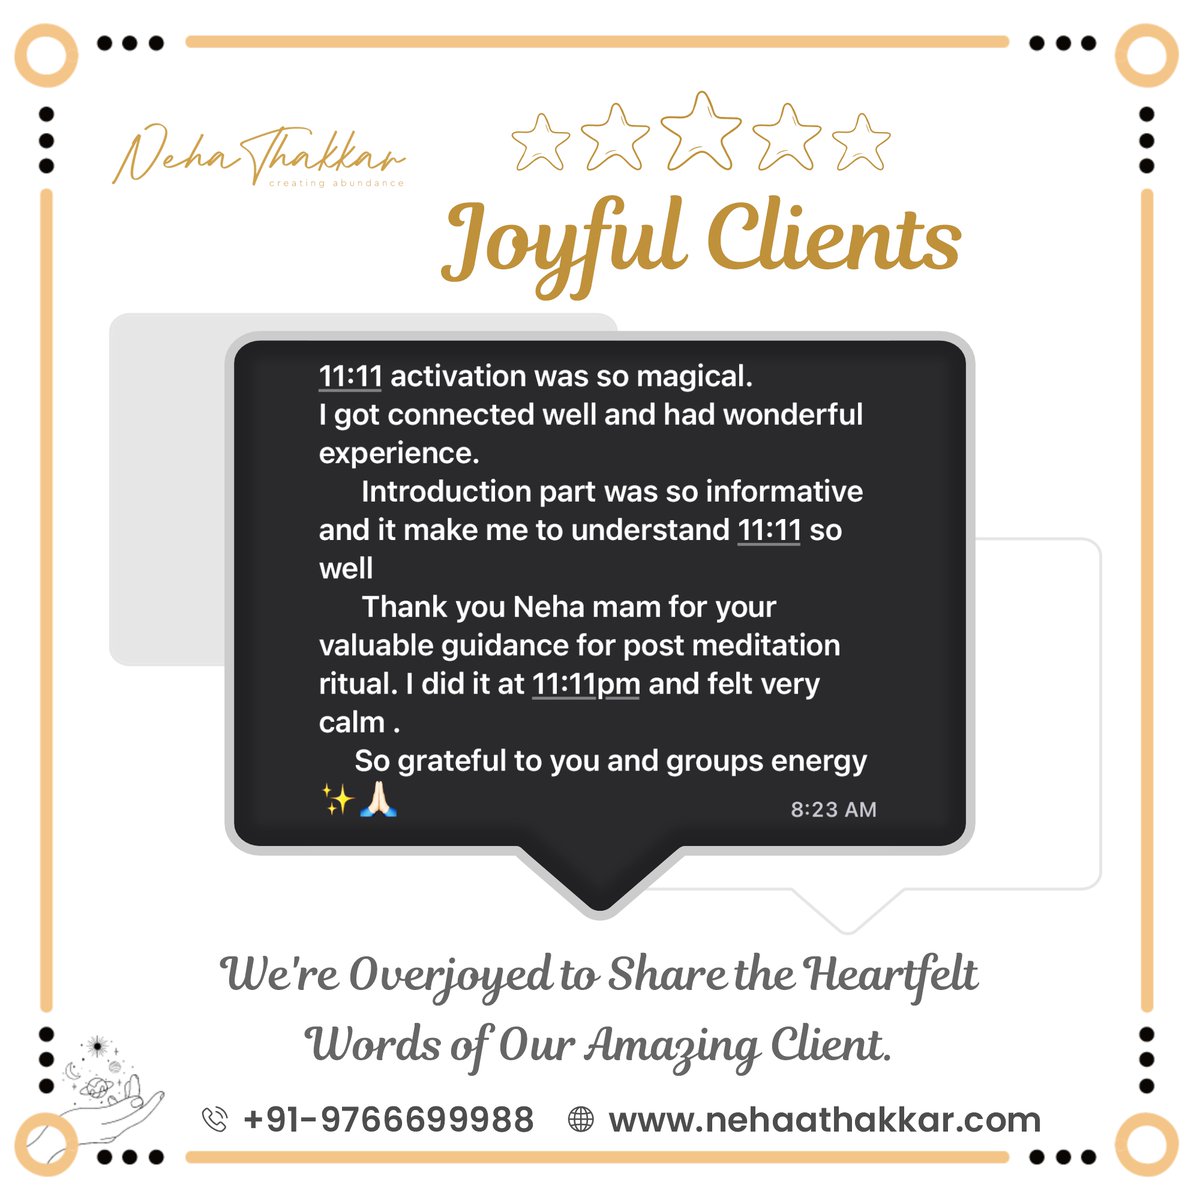 Grateful for the positive feedback from my client, reinforcing the power of enlightenment and growth. Instagram instagram.com/nehathakkar_cr… Facebook facebook.com/nehathakkarcre… #SpiritualGuidance #ClientFeedback #Gratitude